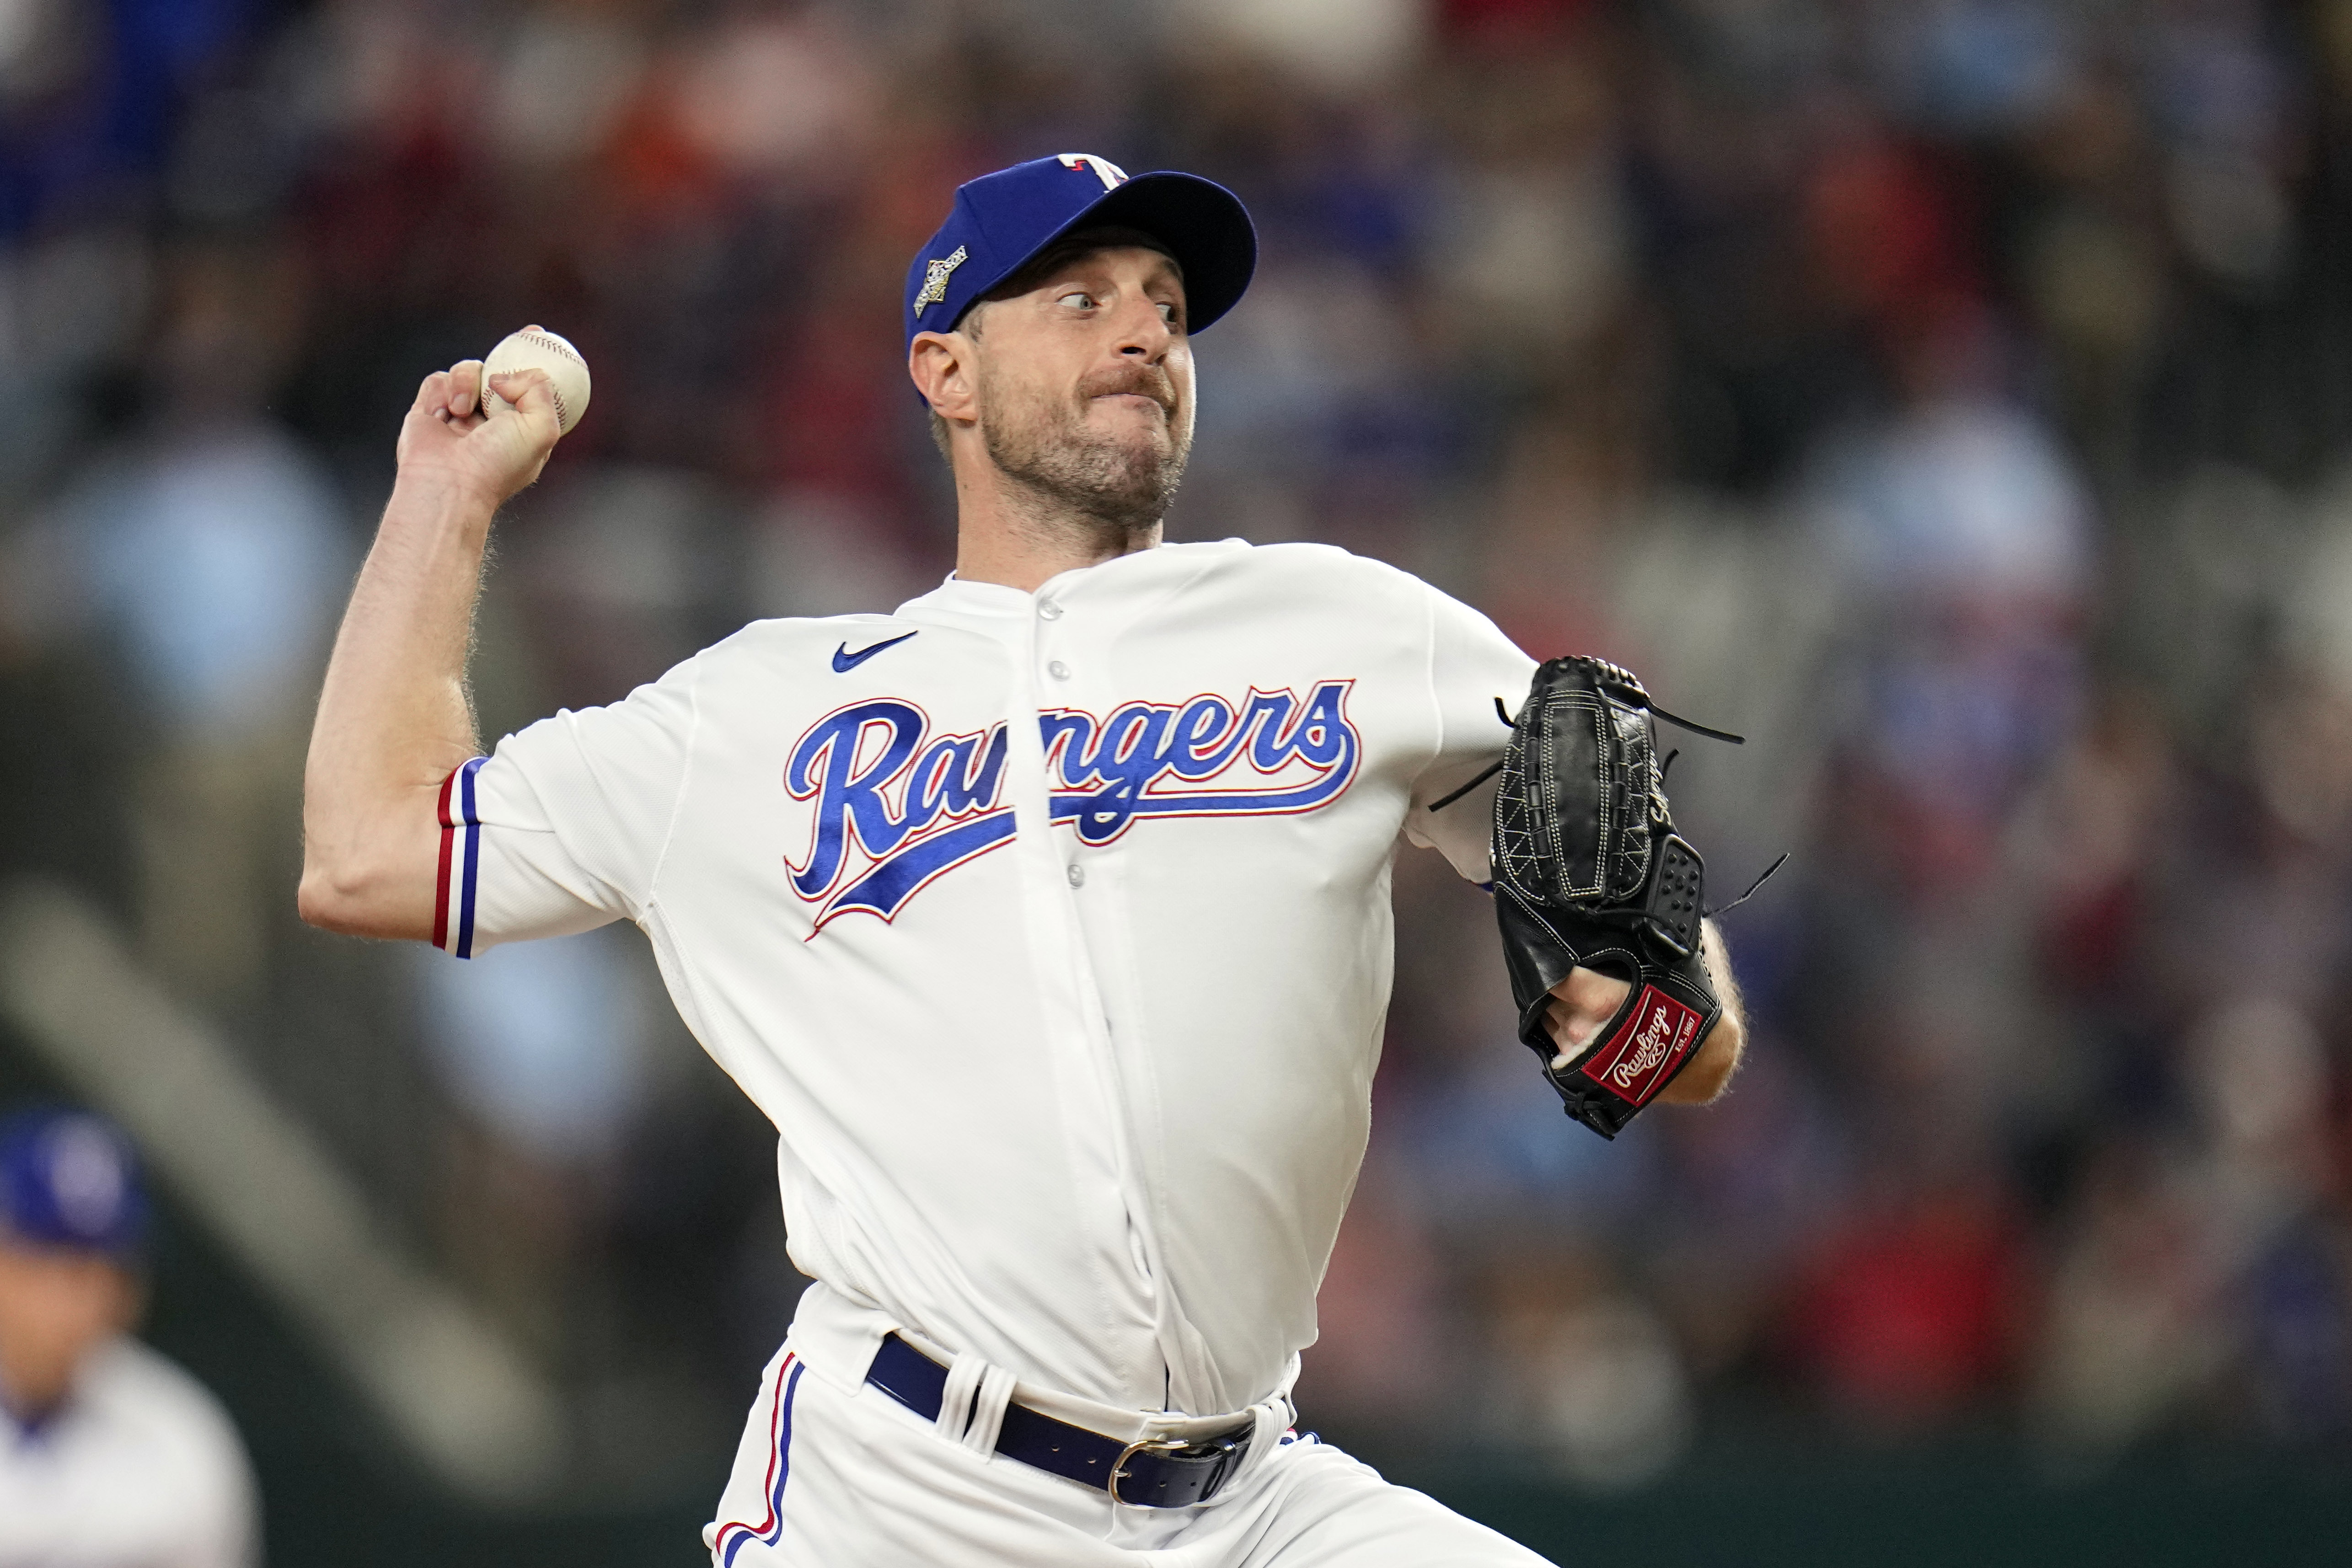 Mets' Max Scherzer gets bitten by one of his dogs on pitching hand